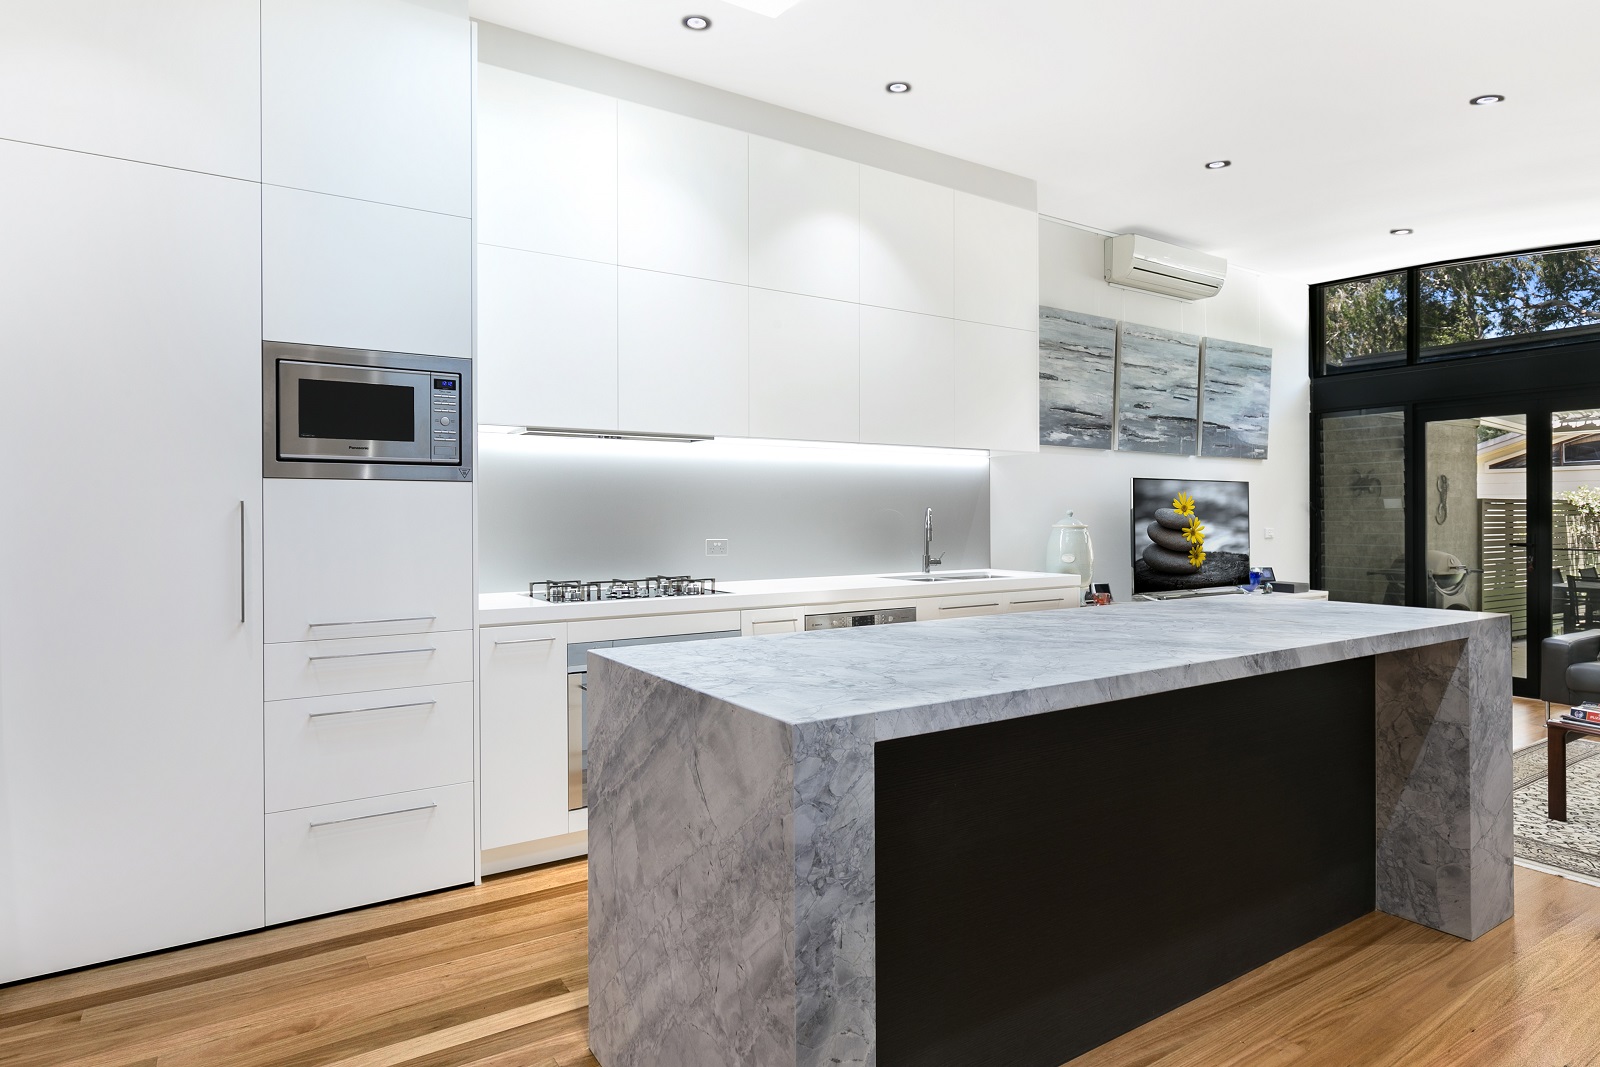 AFTER Lilyfield Renovation, Polyurethane kitchen with Super White Granite in a honed finish